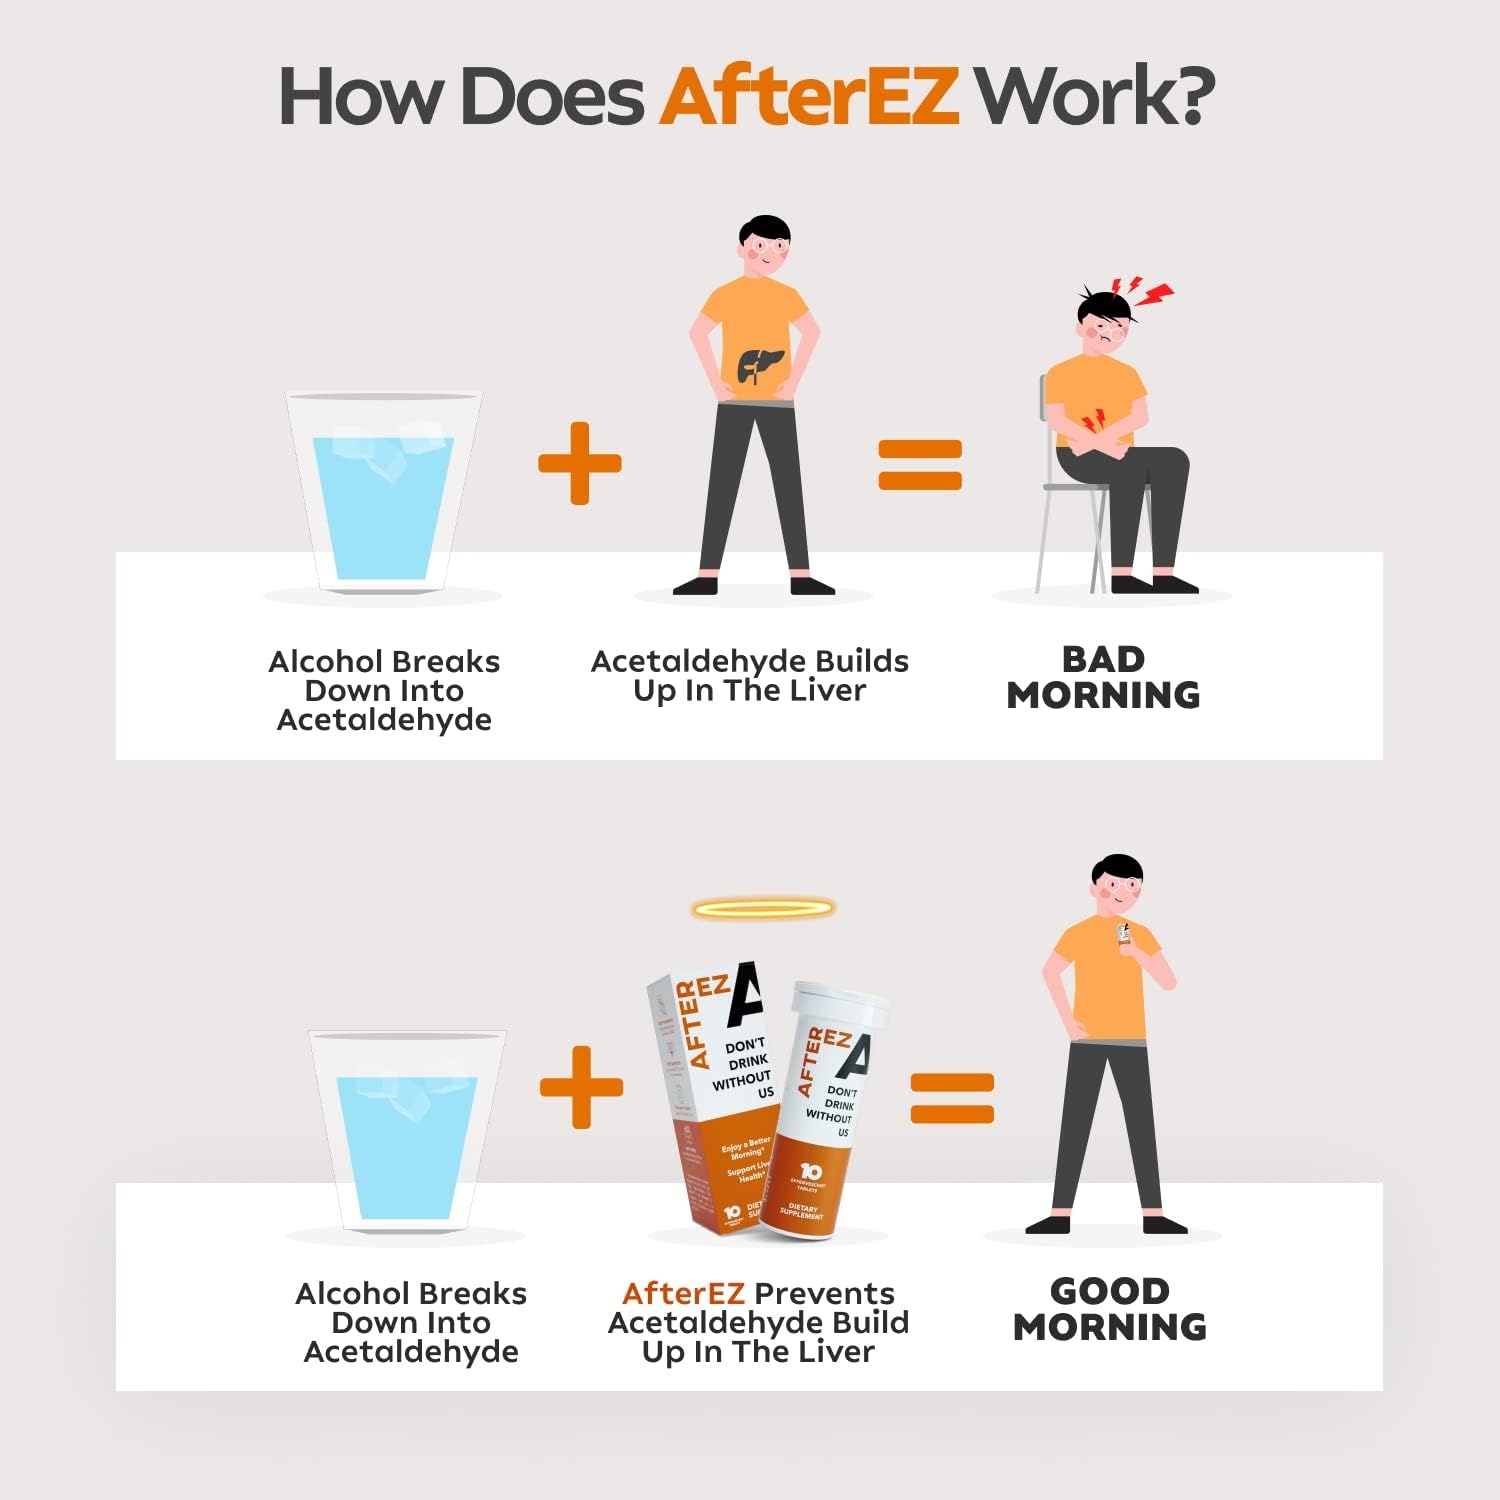 AfterEZ Better Morning After Drink - After Party Relief Fizzy Tablets w DHM, Milk Thistle & Prickly Pear for Liver Support & Good Morning Recovery - 1 Pack